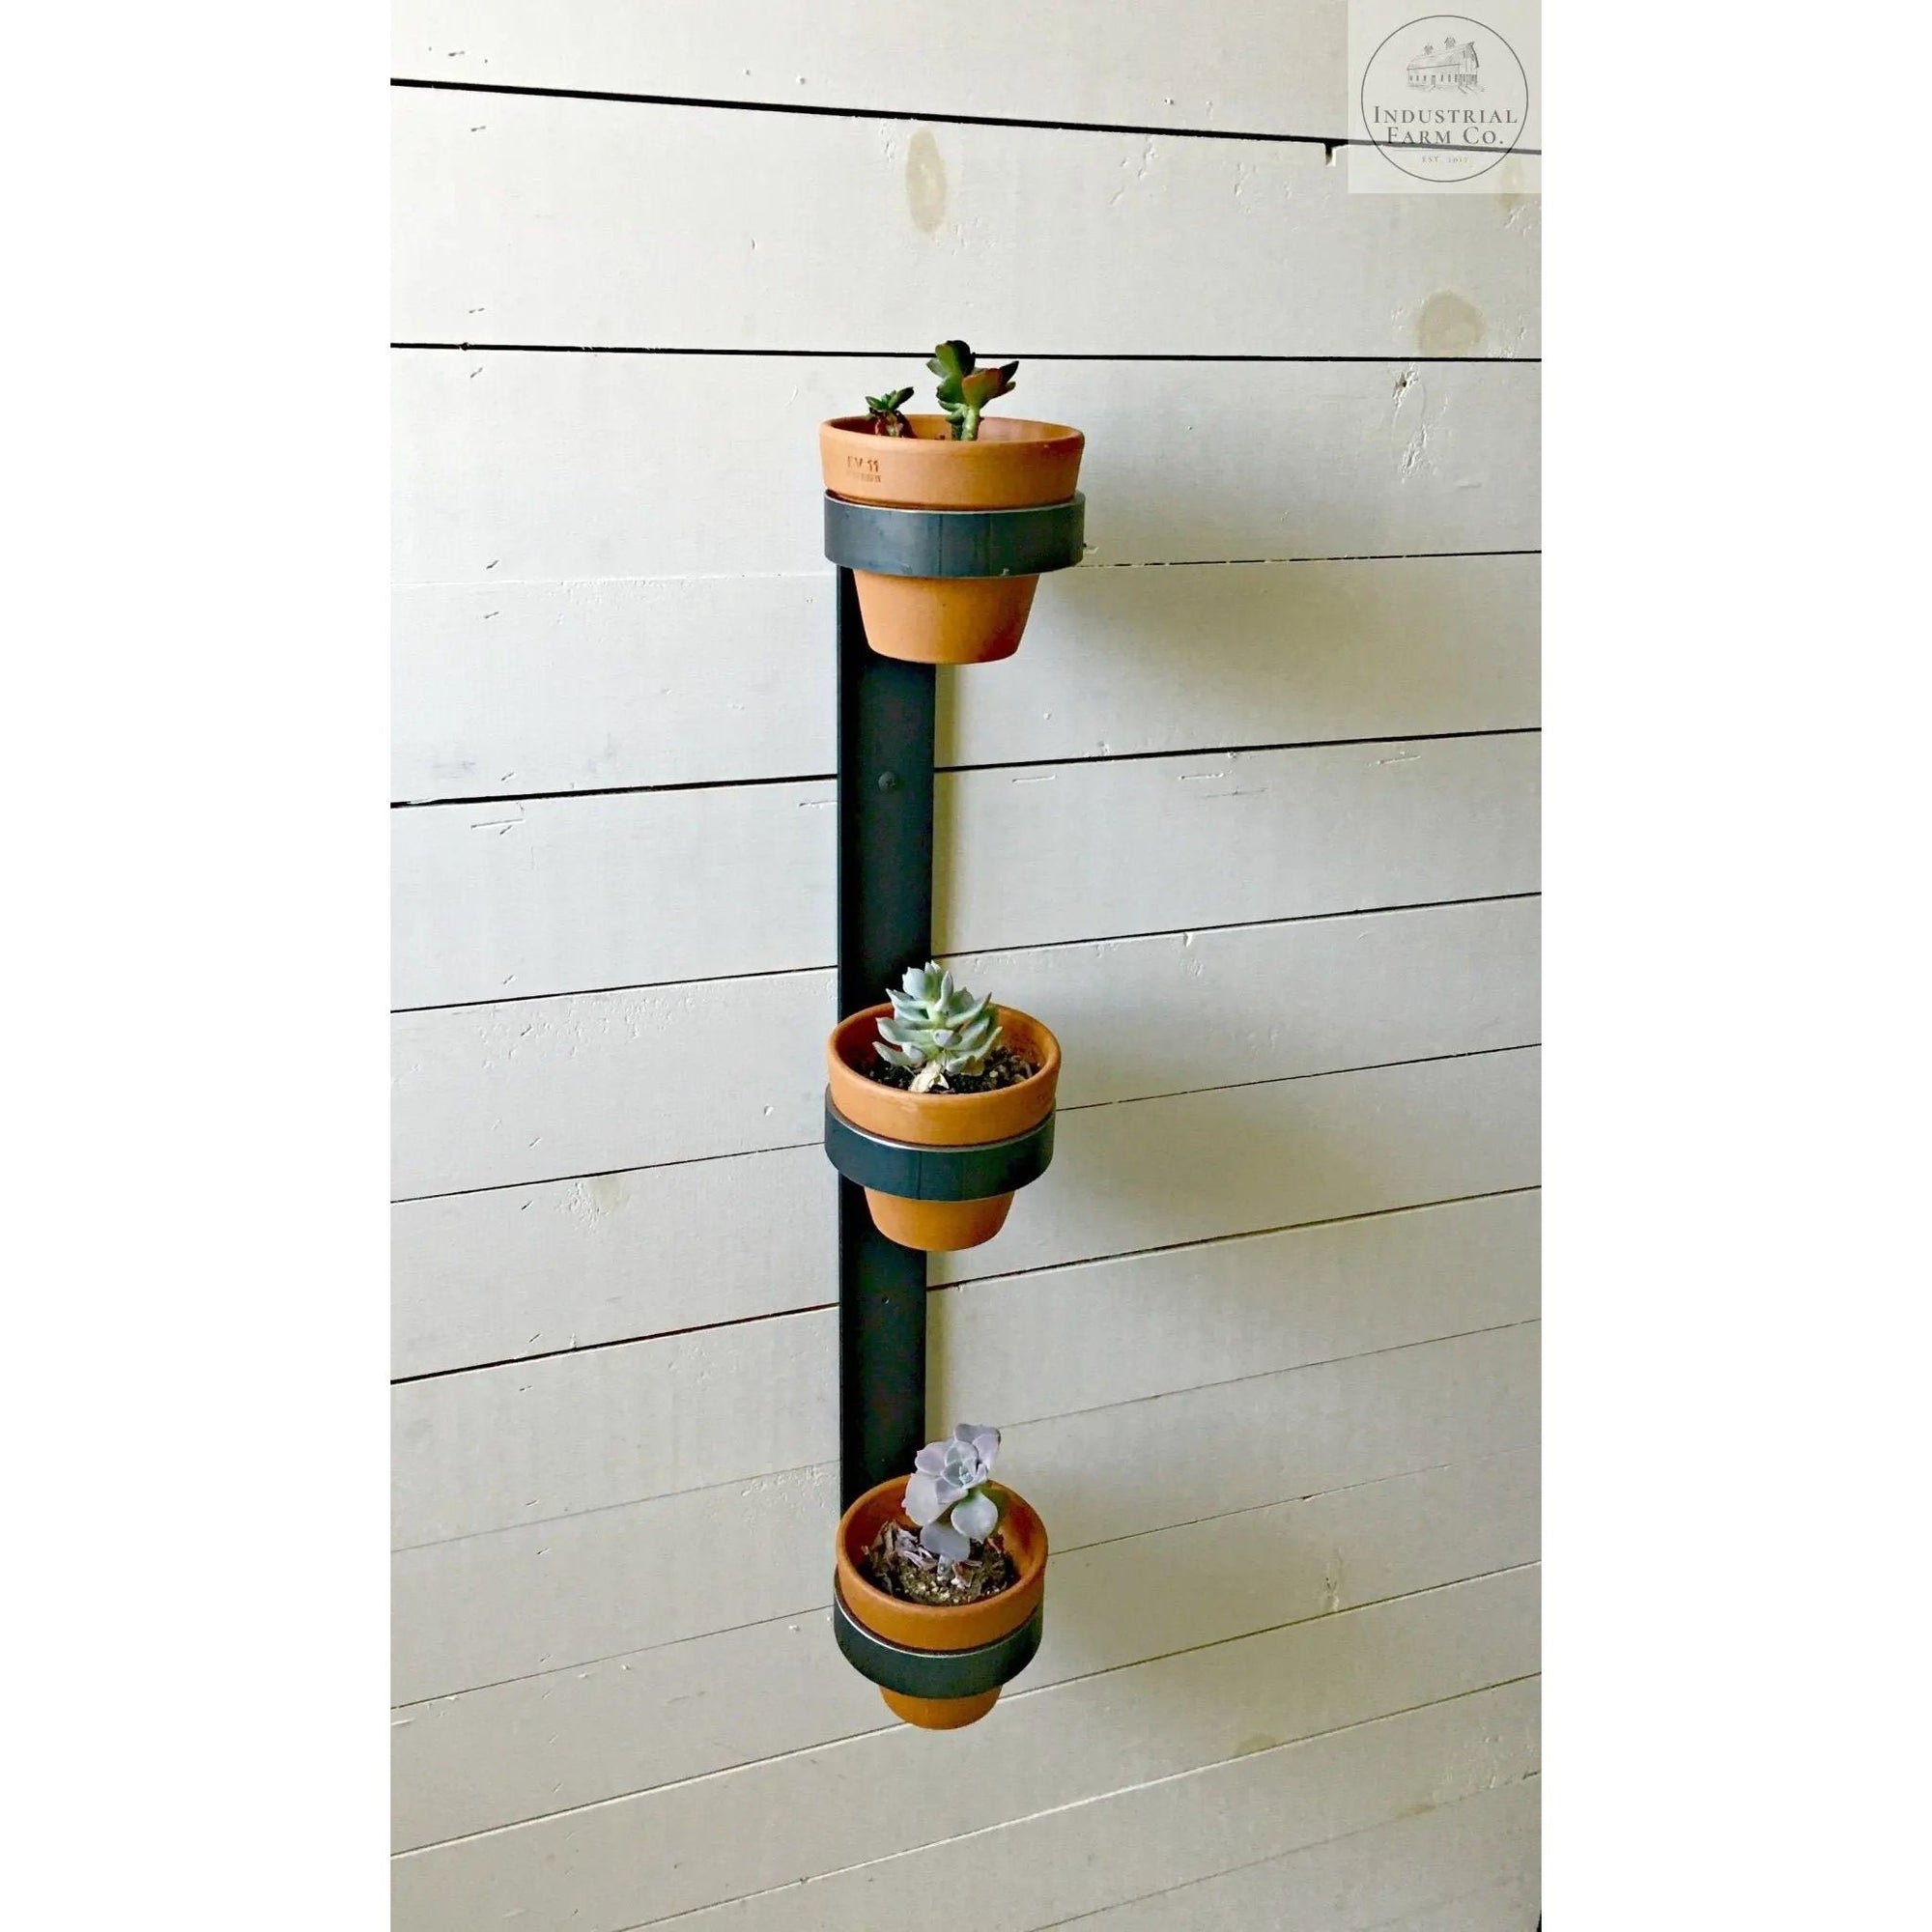 The Watertown Wall Mount Vertical Planter Plant Holder 24" Style 4" Pots | Industrial Farm Co